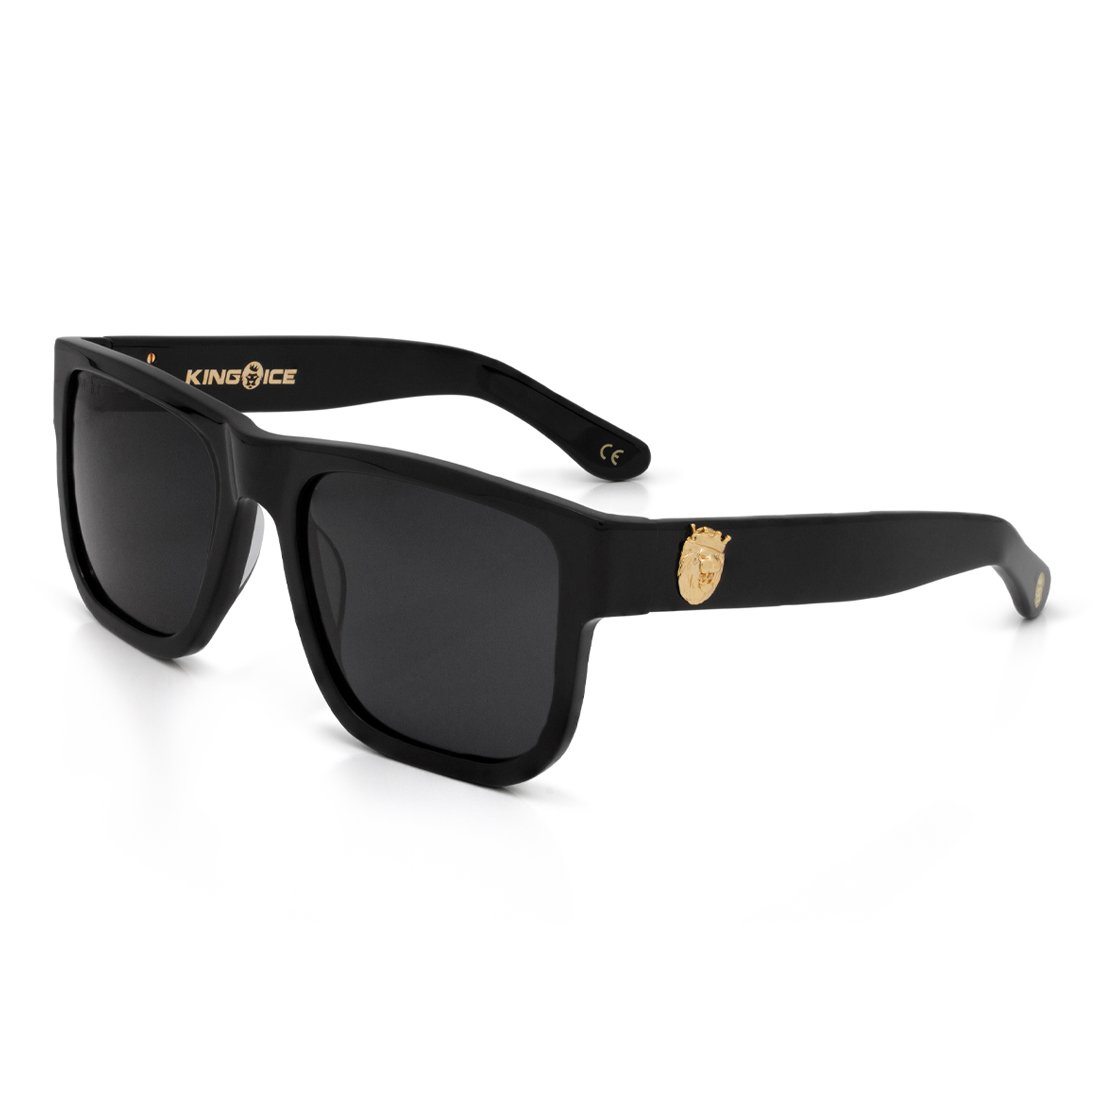 Lion Head Shades with Glossy Black Frame